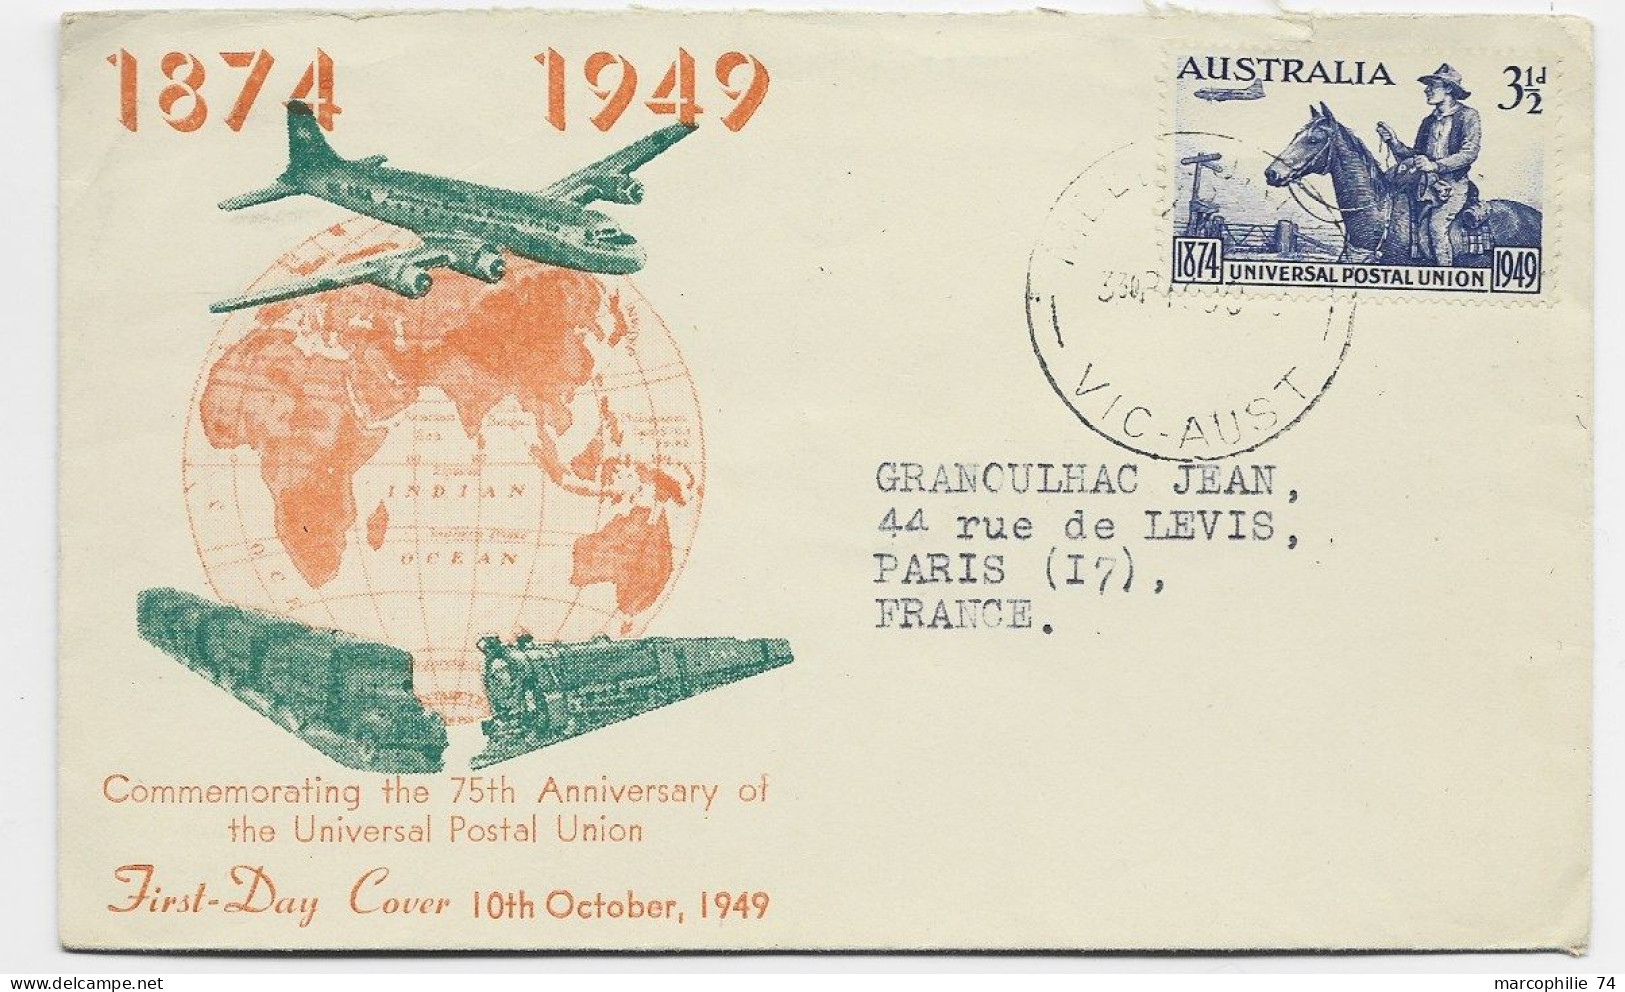 AUSTRALIA 3 1/2D  UPU SOLO LETTRE COVER FDC 1874 1949 TO FRANCE - Covers & Documents